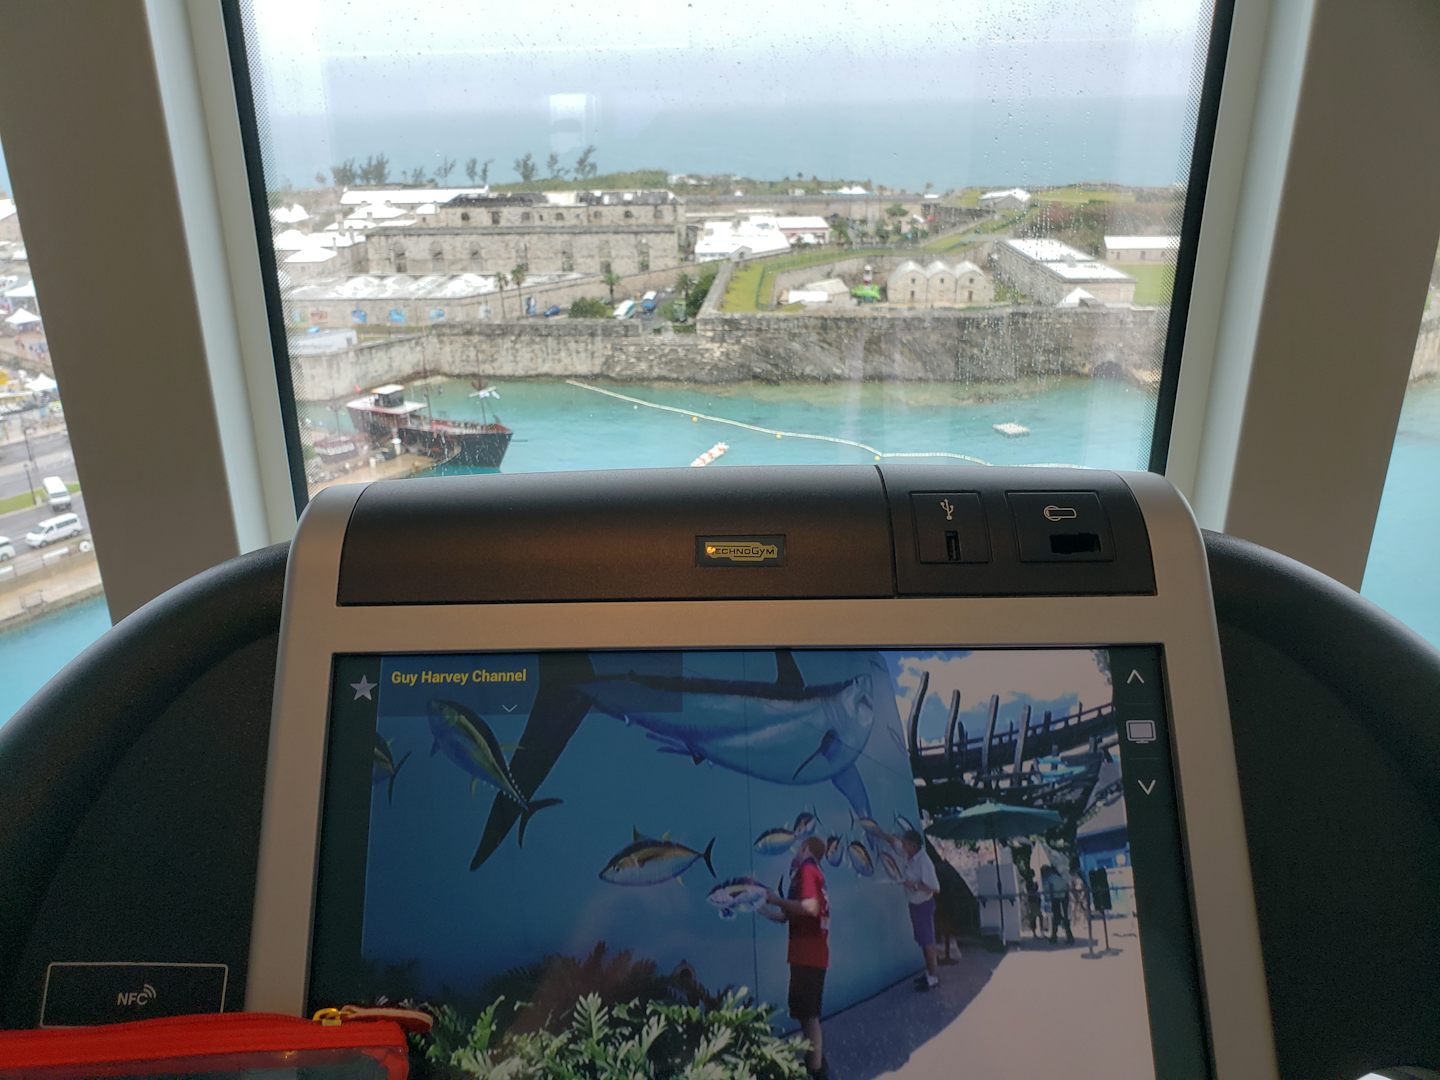 View from the treadmill